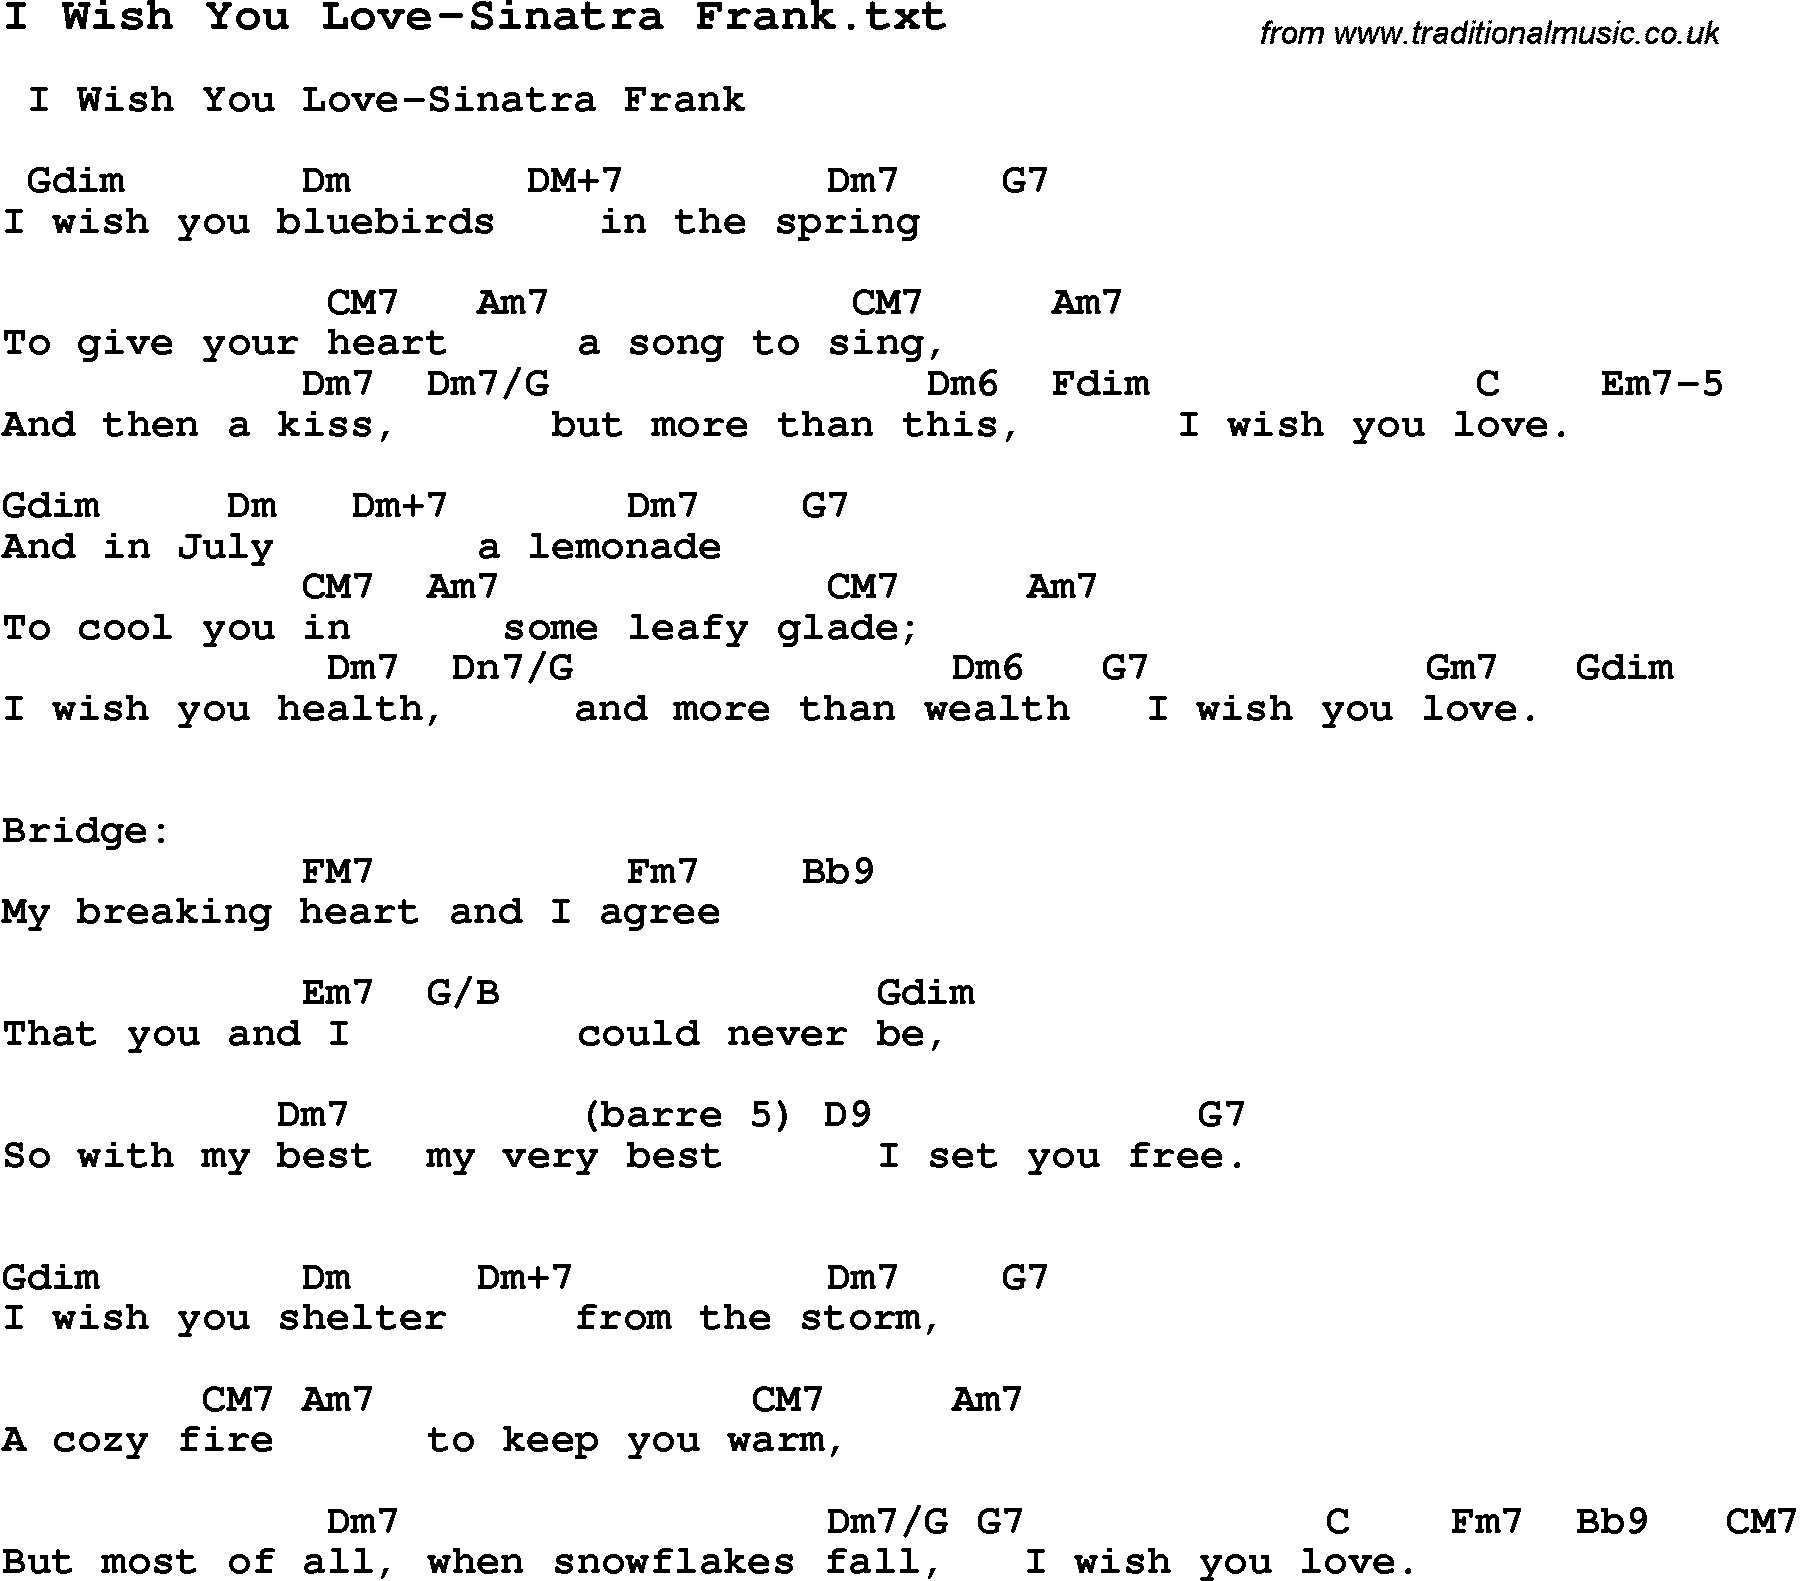 Jazz Song from top bands and vocal artists with chords, tabs and lyrics - I Wish You Love-Sinatra Frank